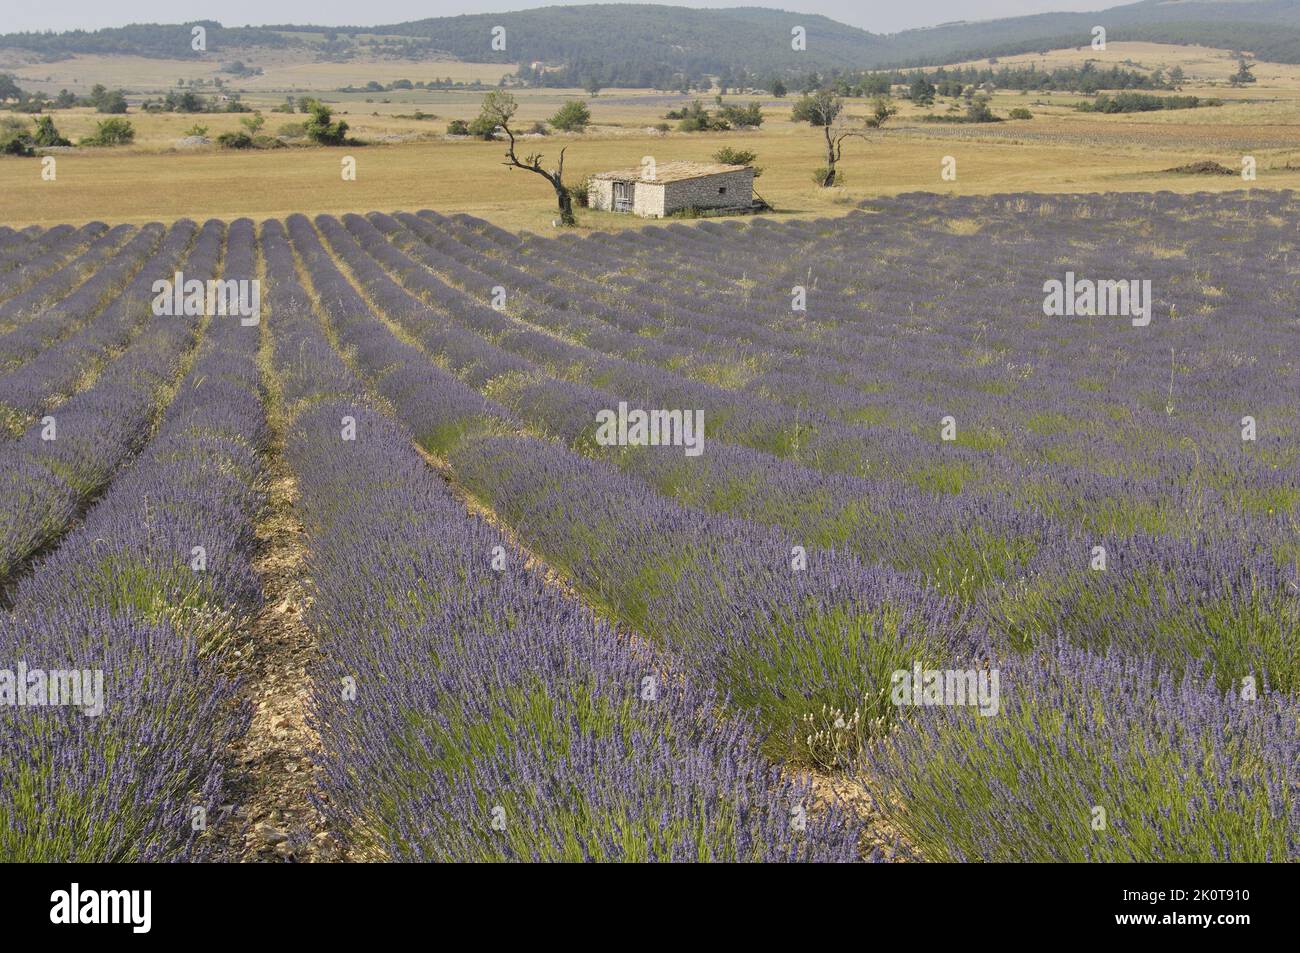 Lavender (Lavandula sp) shed near a field of flowers to be harvested - Sault area - Provence - Vaucluse - France Stock Photo